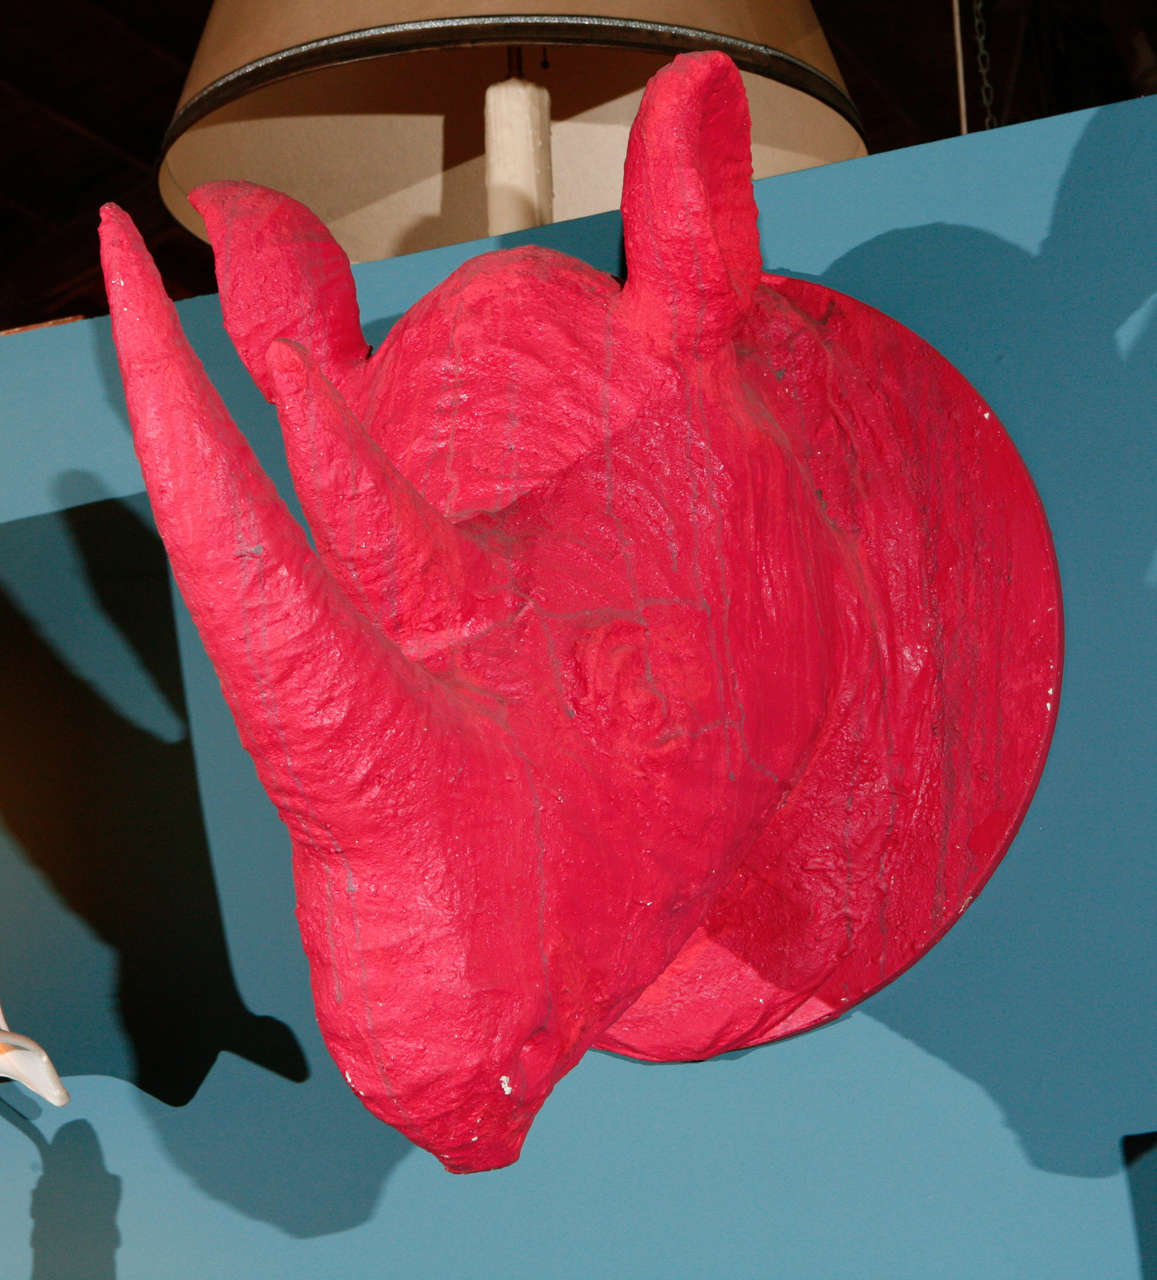 A playful pair of red rhino wall sculptures. Made of paper mache in a a bright red color with accented with free form gray lines.